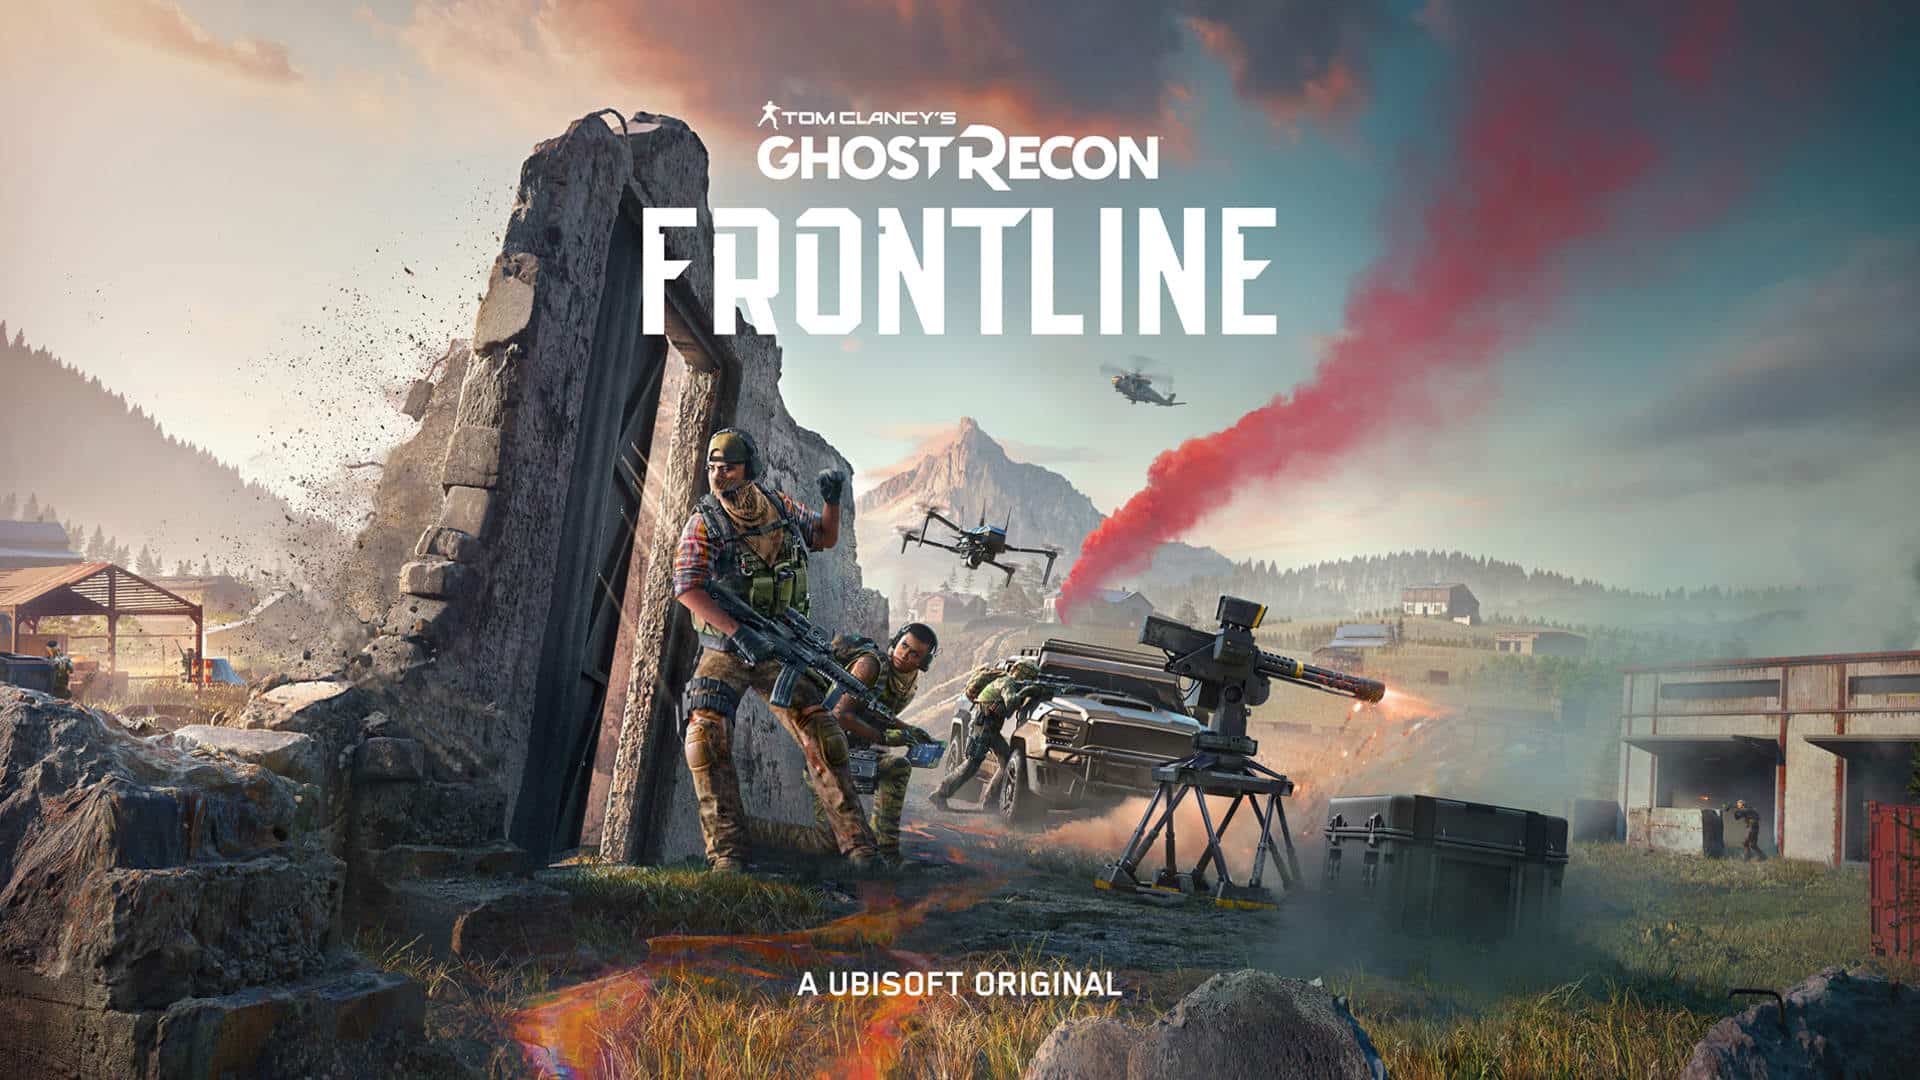 Ghost Recon Frontline is a Free-To-Play 100+ Player All-Out Warfare Shooter